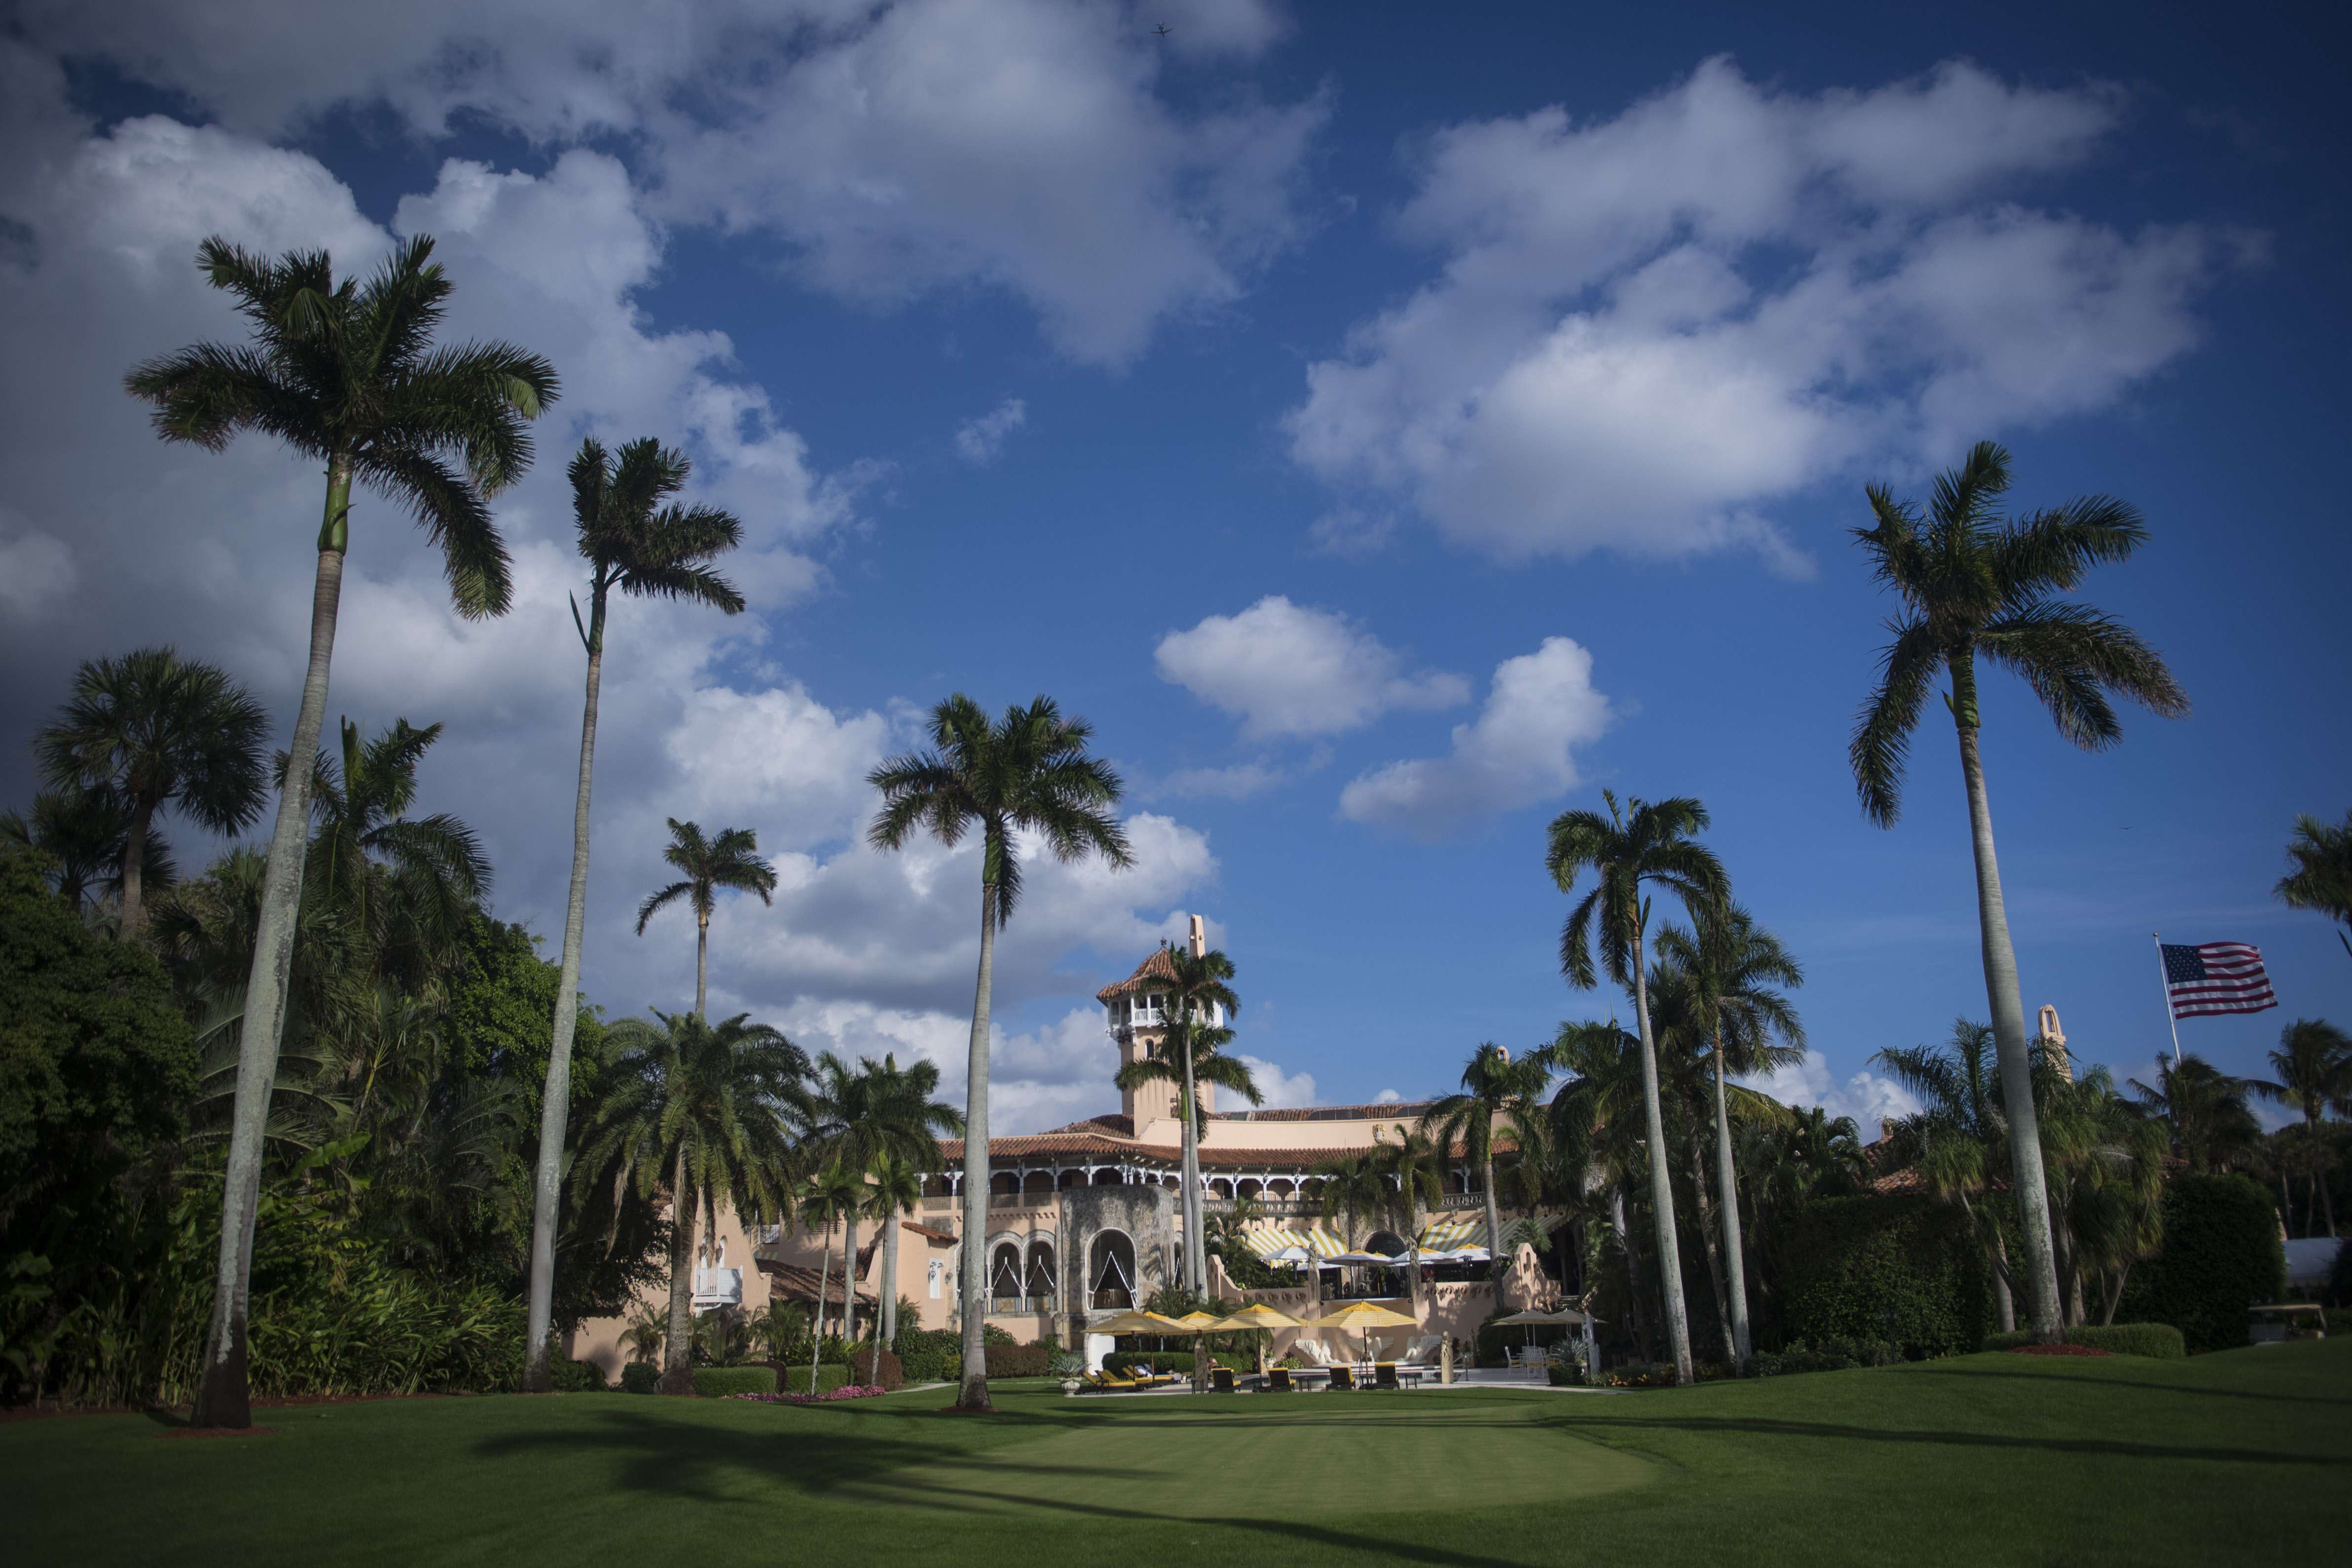 Xi Jinping is expected to visit Trump in Mar-a-Lago next month. Photo: Washington Post